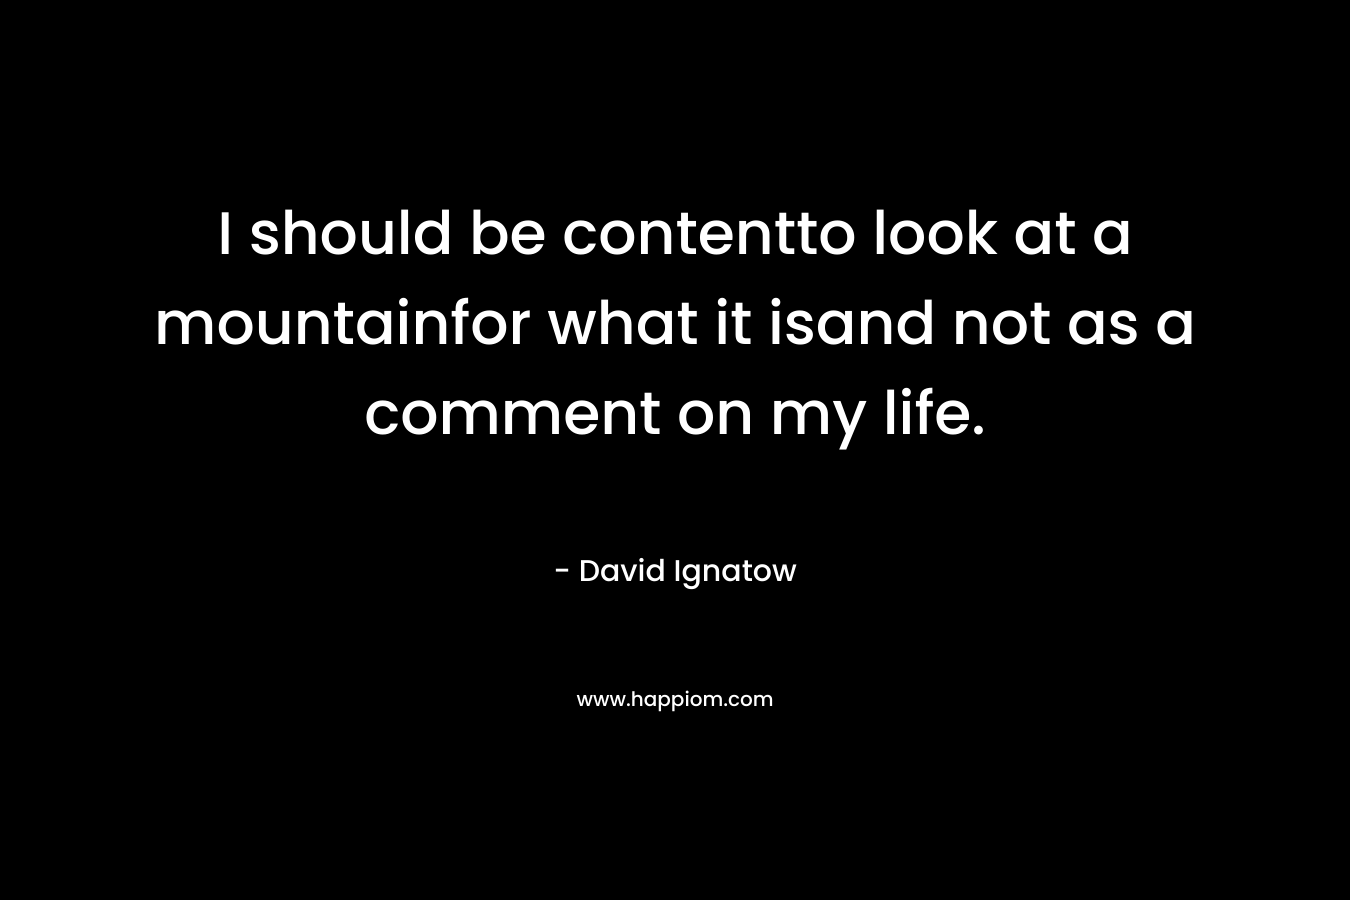 I should be contentto look at a mountainfor what it isand not as a comment on my life.